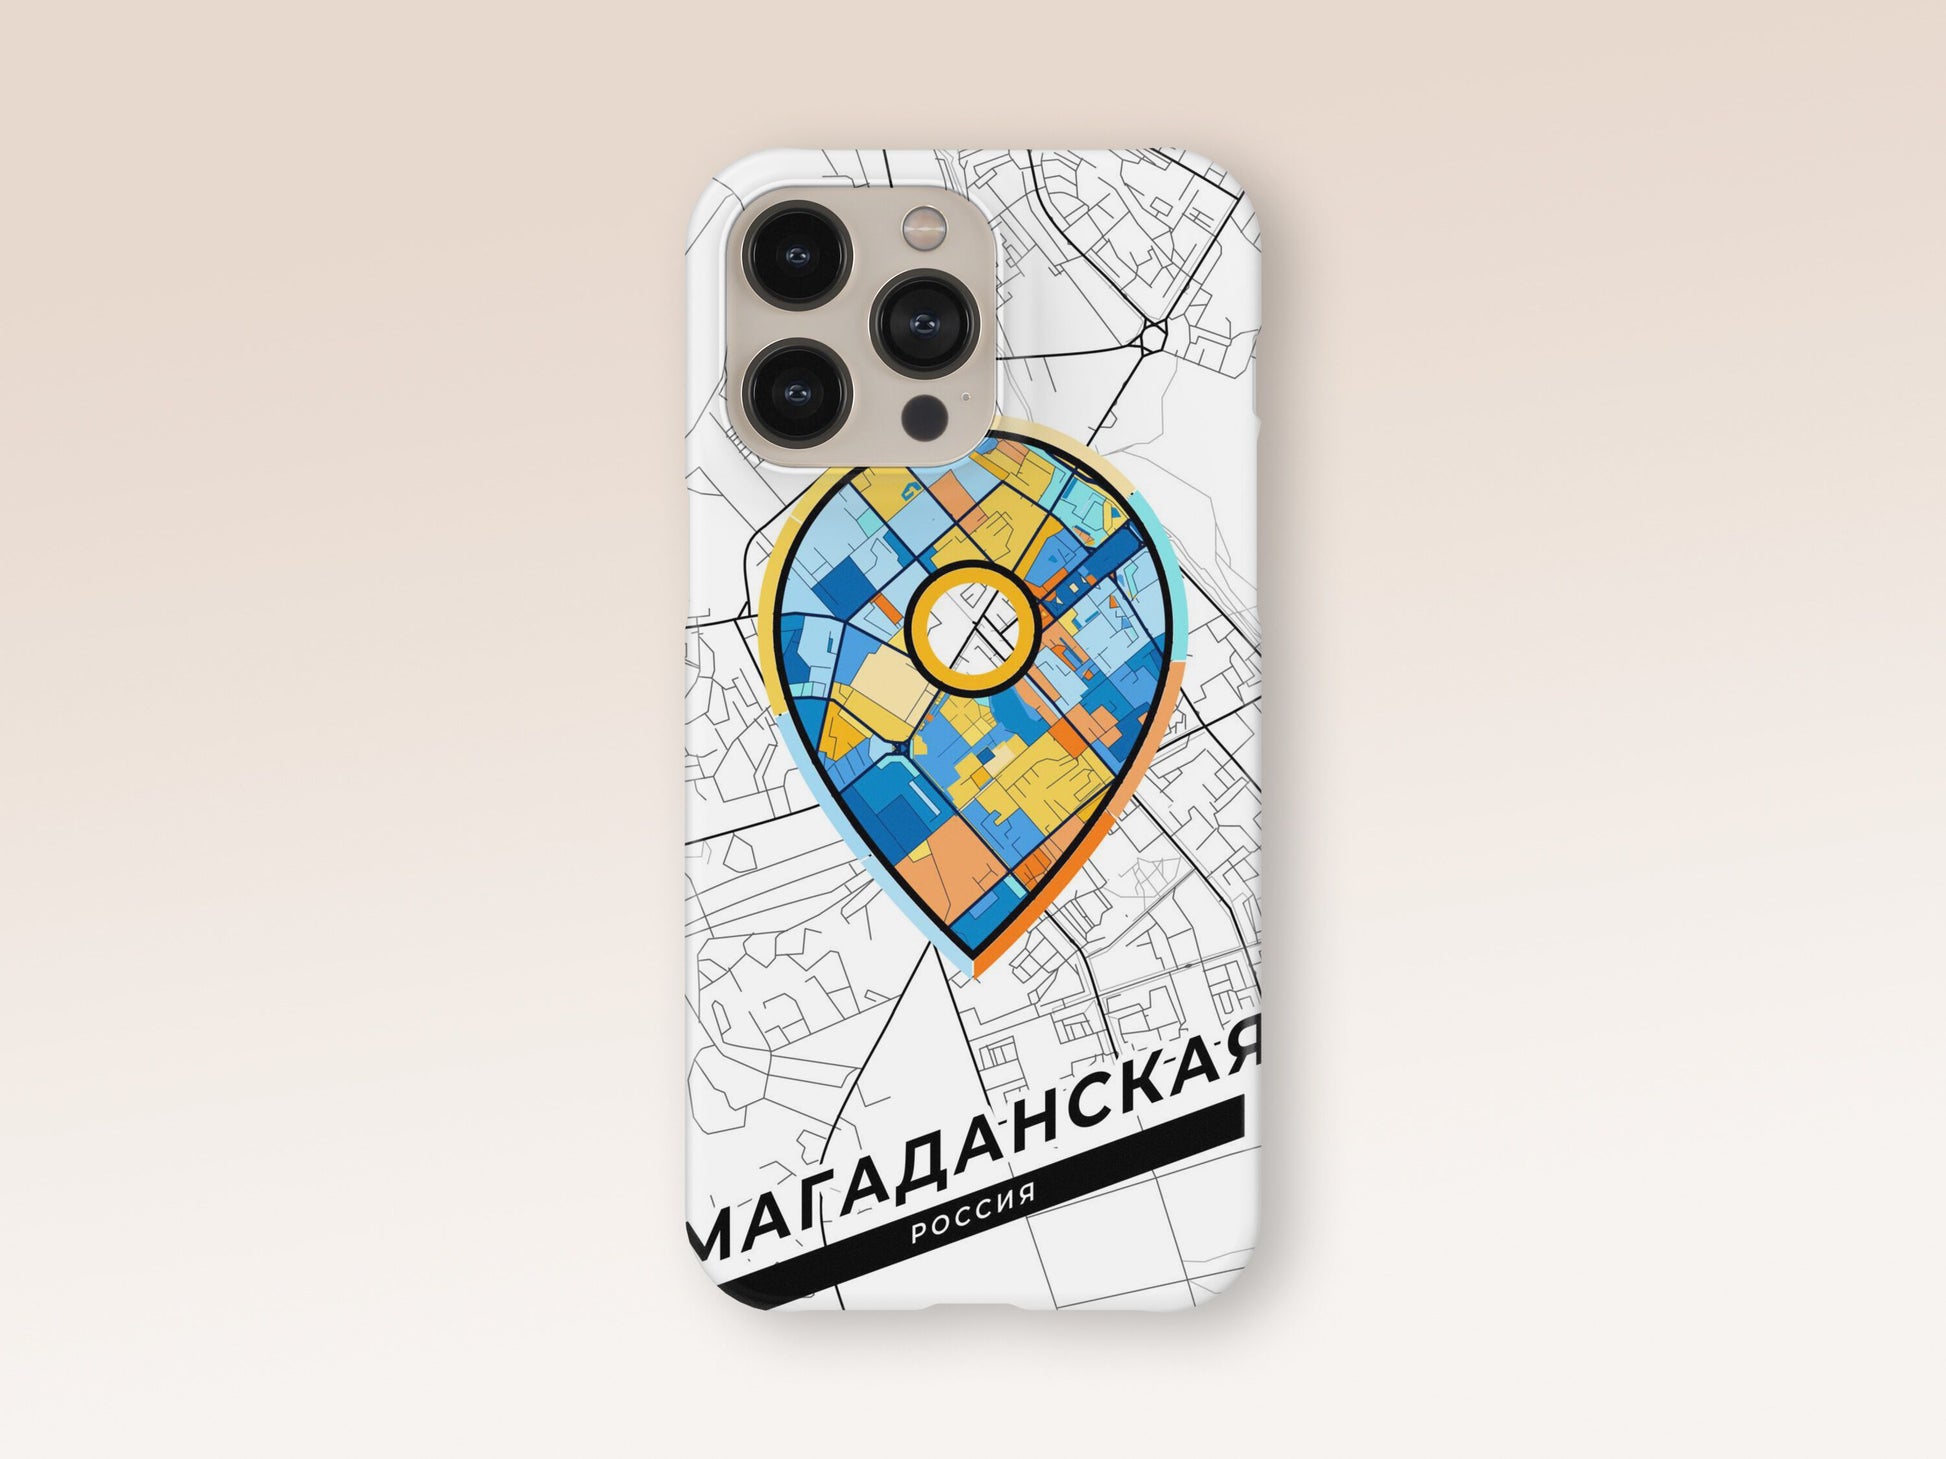 Magadan Russia slim phone case with colorful icon. Birthday, wedding or housewarming gift. Couple match cases. 1